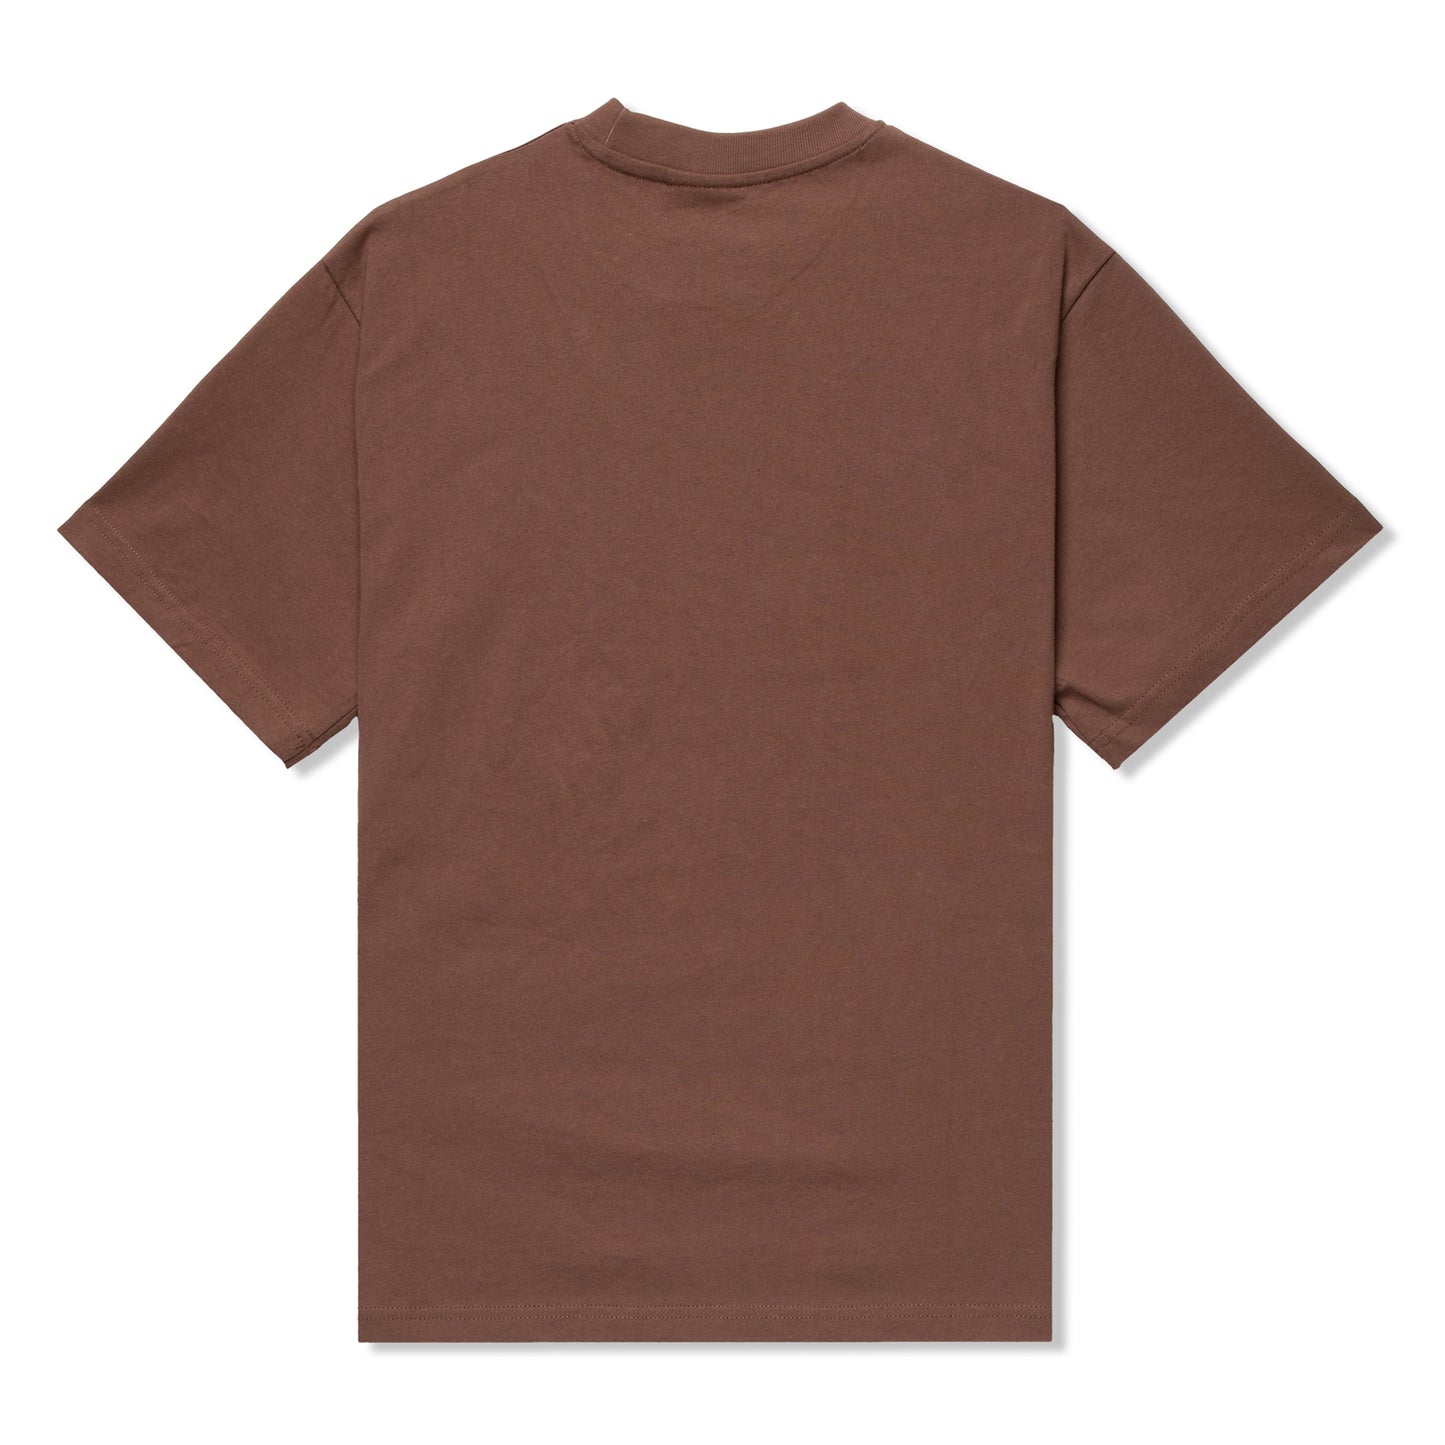 Cash Only Super Bowl Tee (Brown)